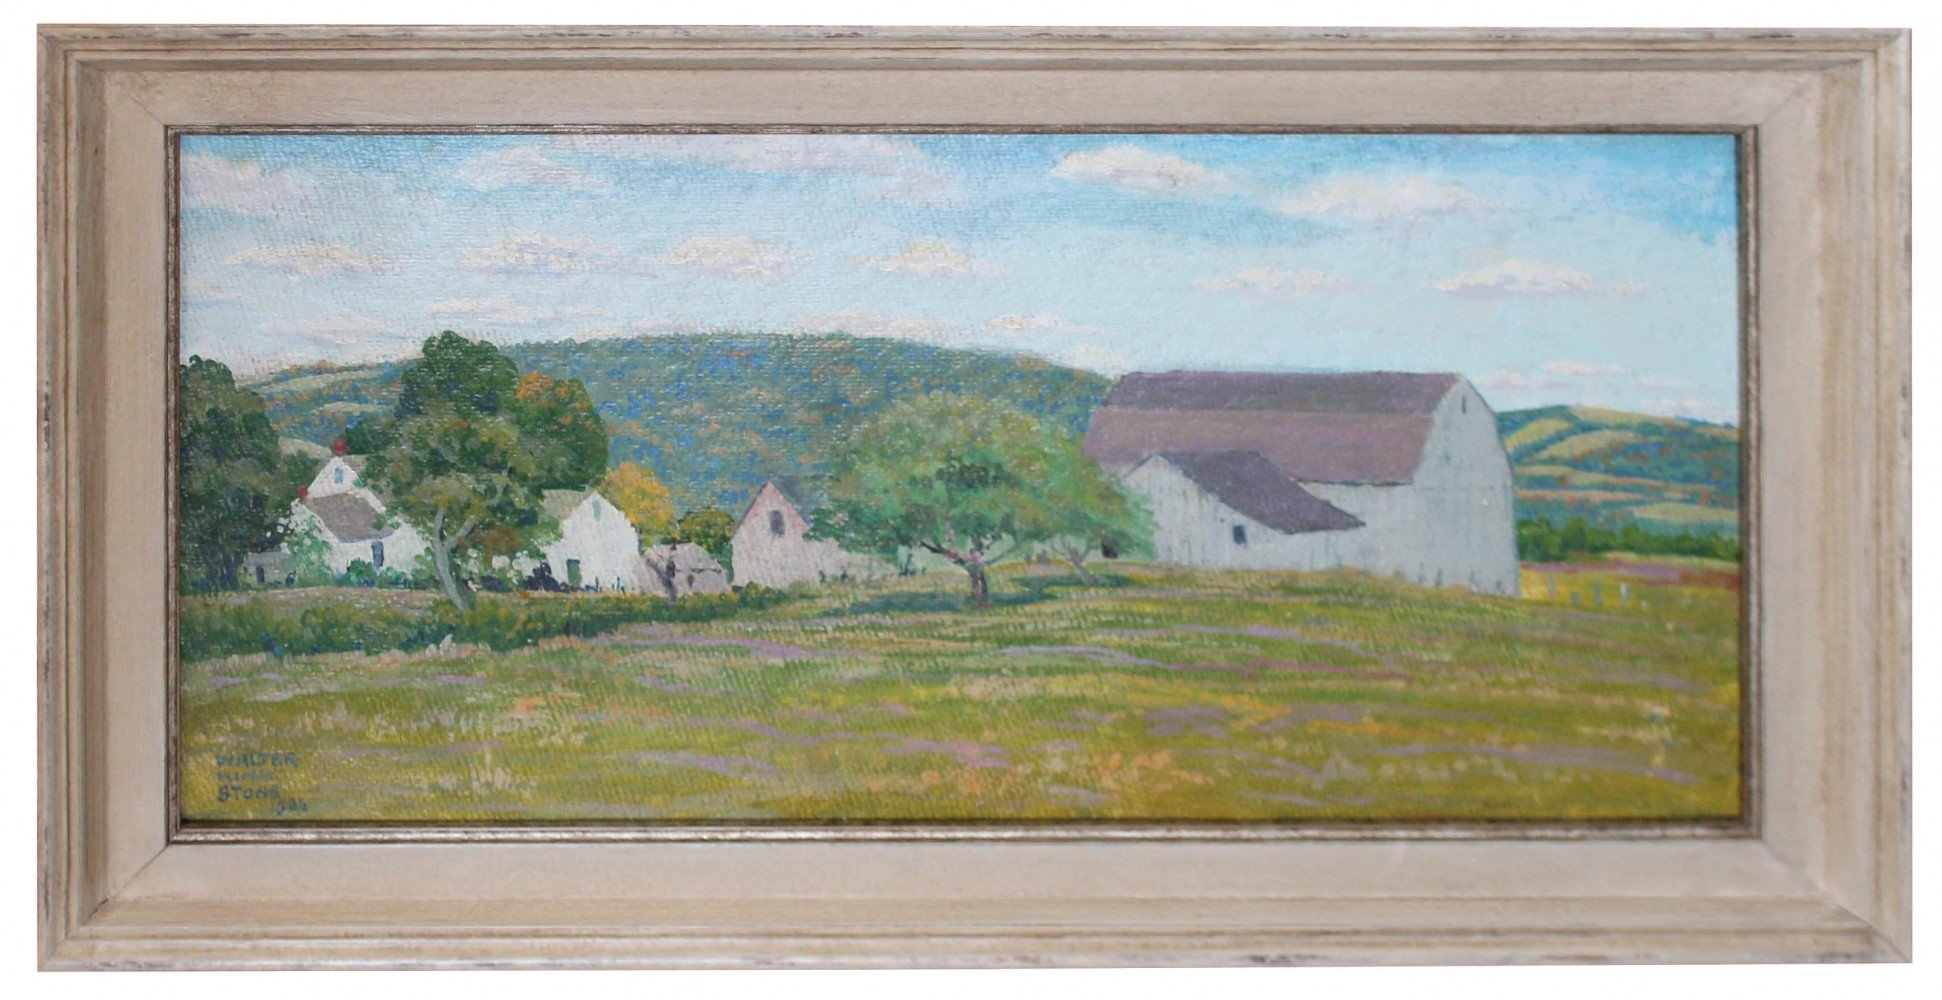 Landscape with Barn by Walter King Stone